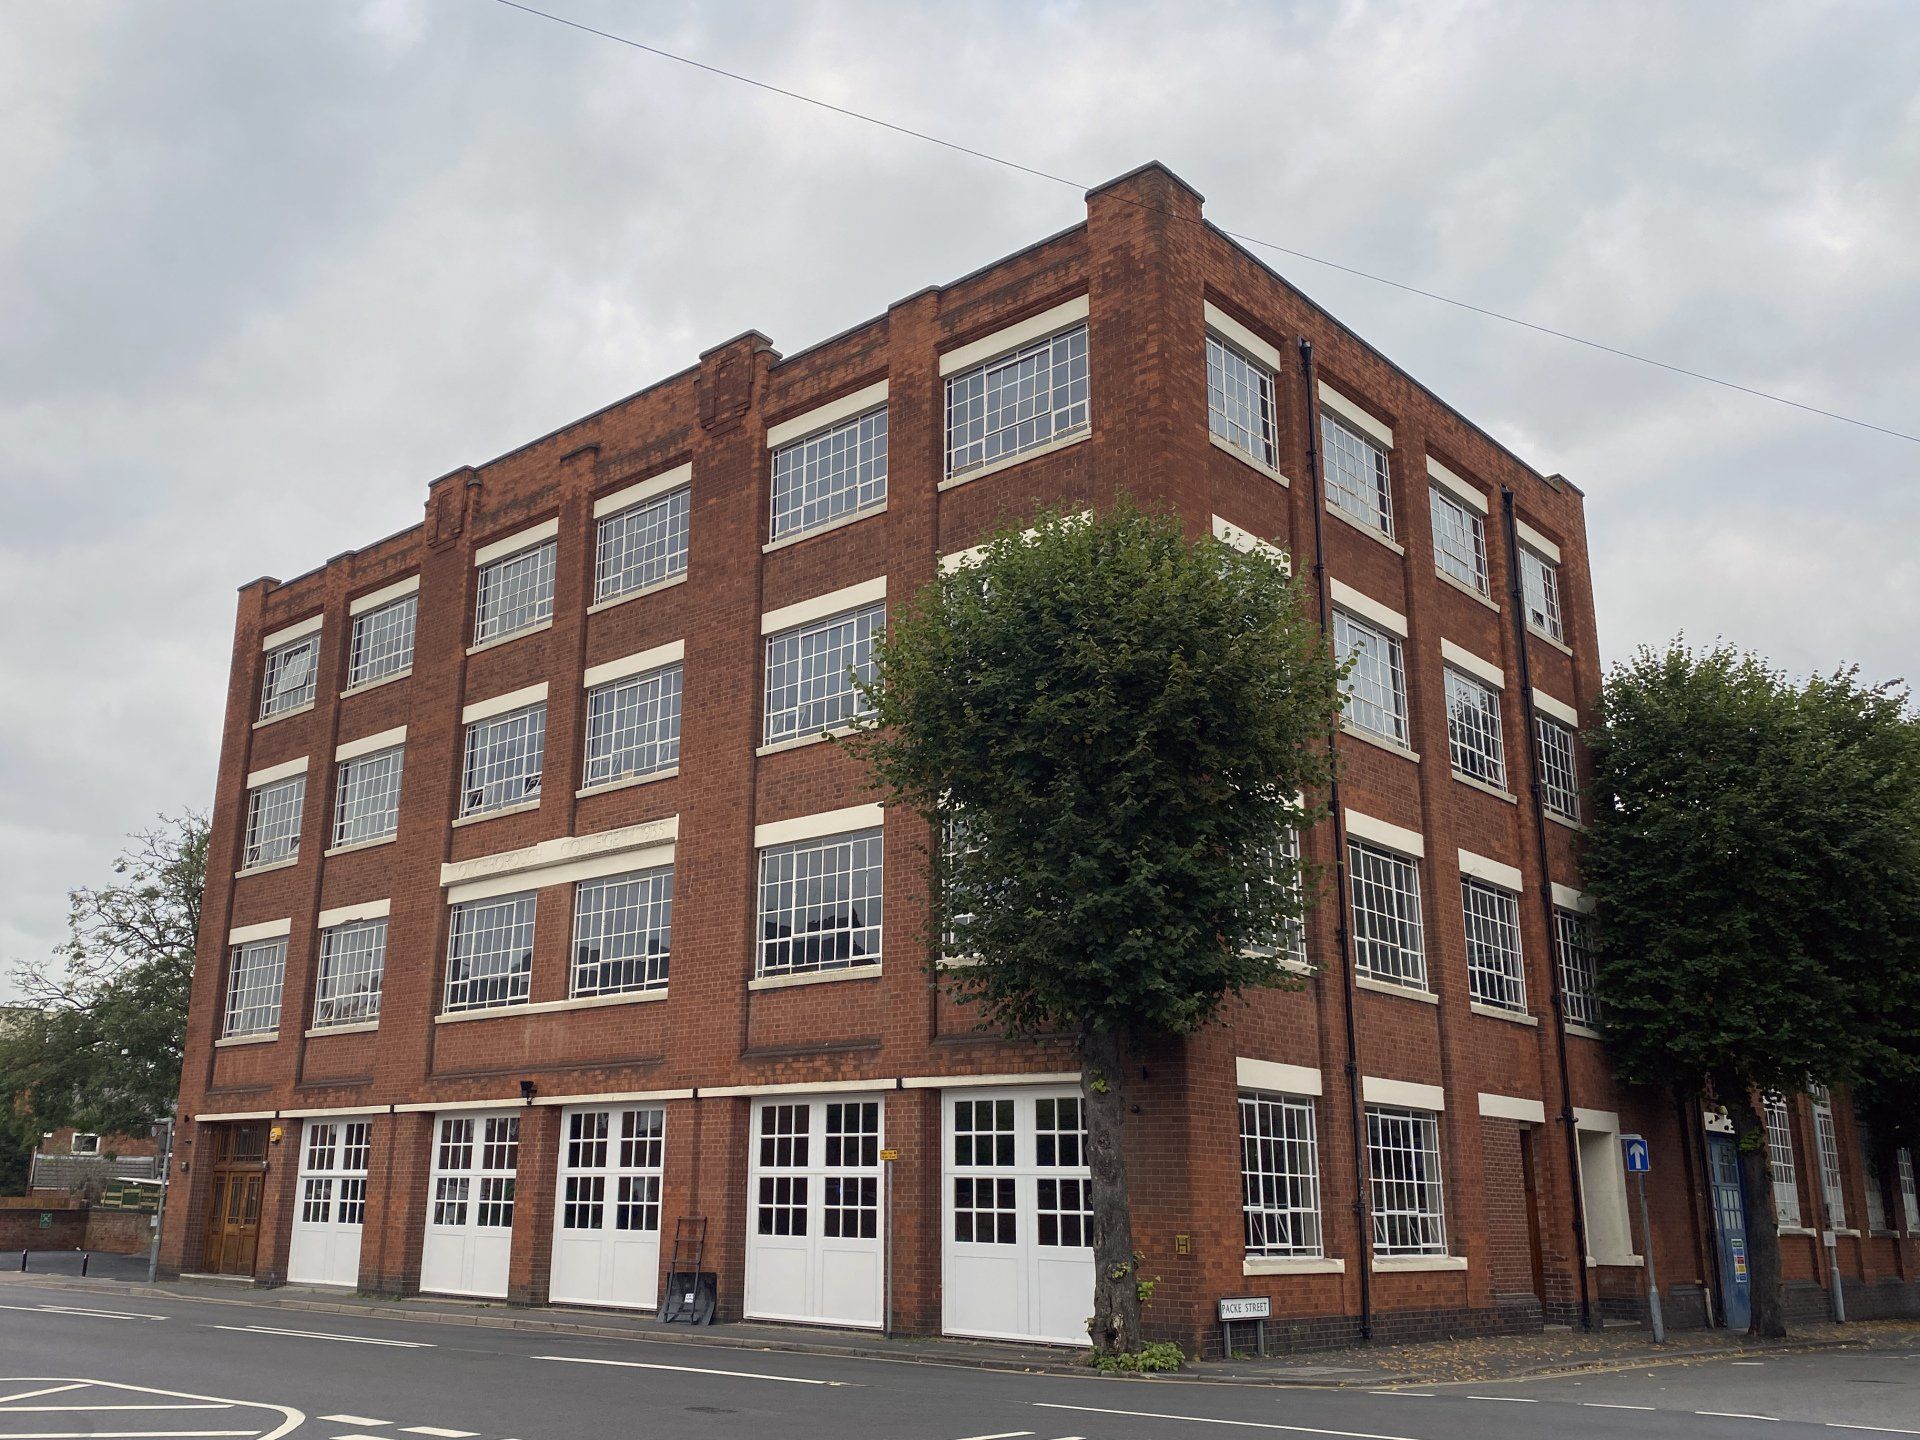 The Old Art College Building in Loughborough. 1930s industrial design, four floors, large windows